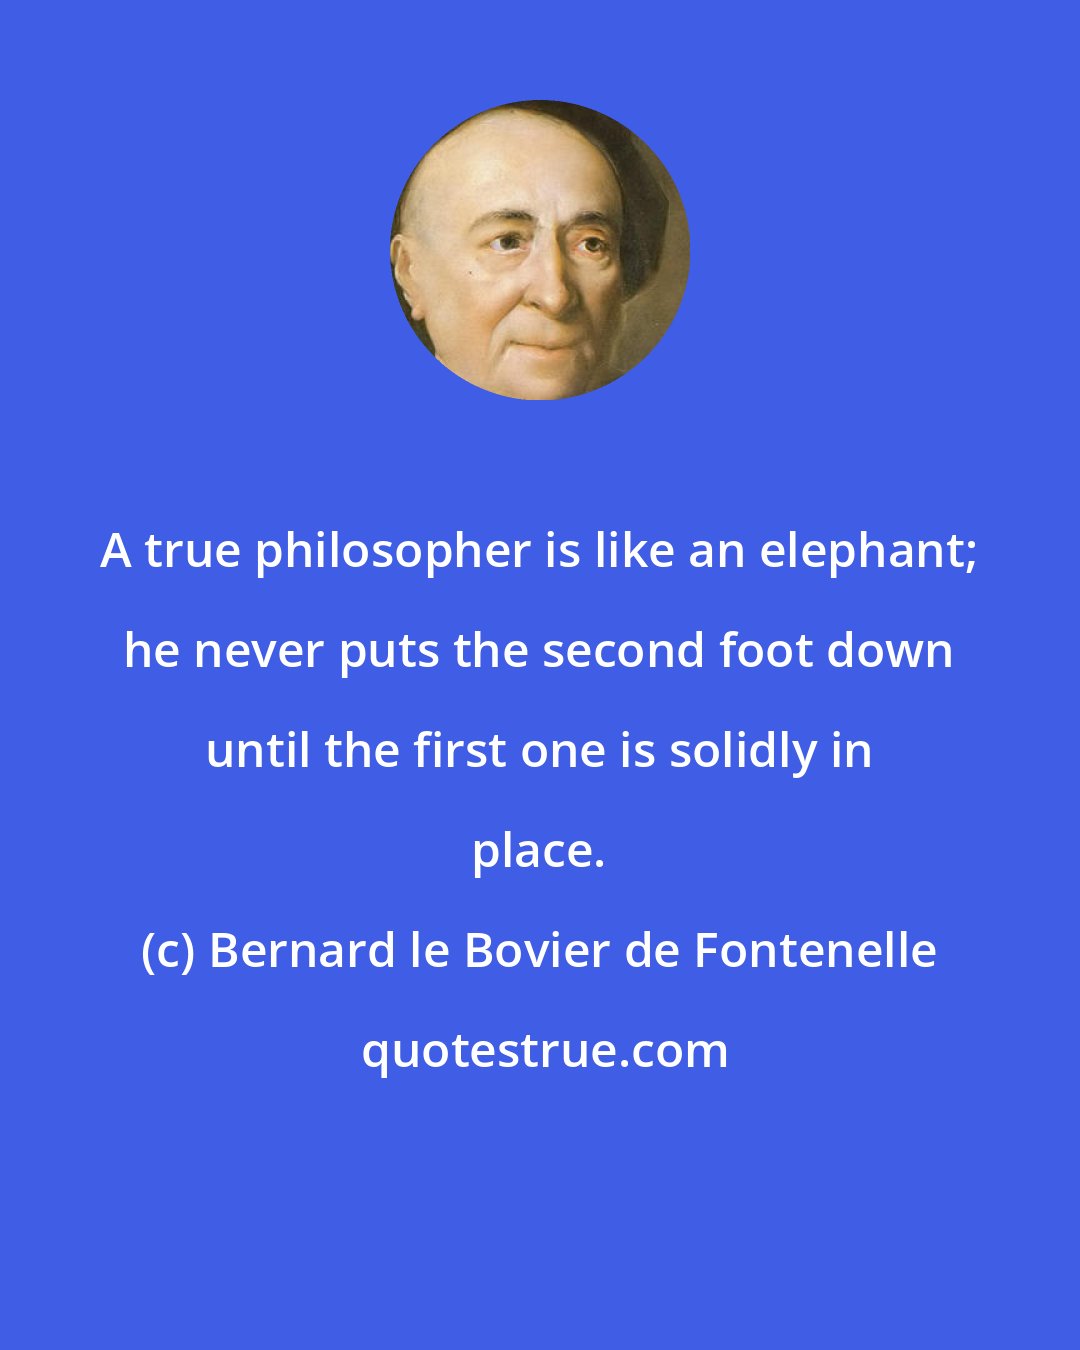 Bernard le Bovier de Fontenelle: A true philosopher is like an elephant; he never puts the second foot down until the first one is solidly in place.